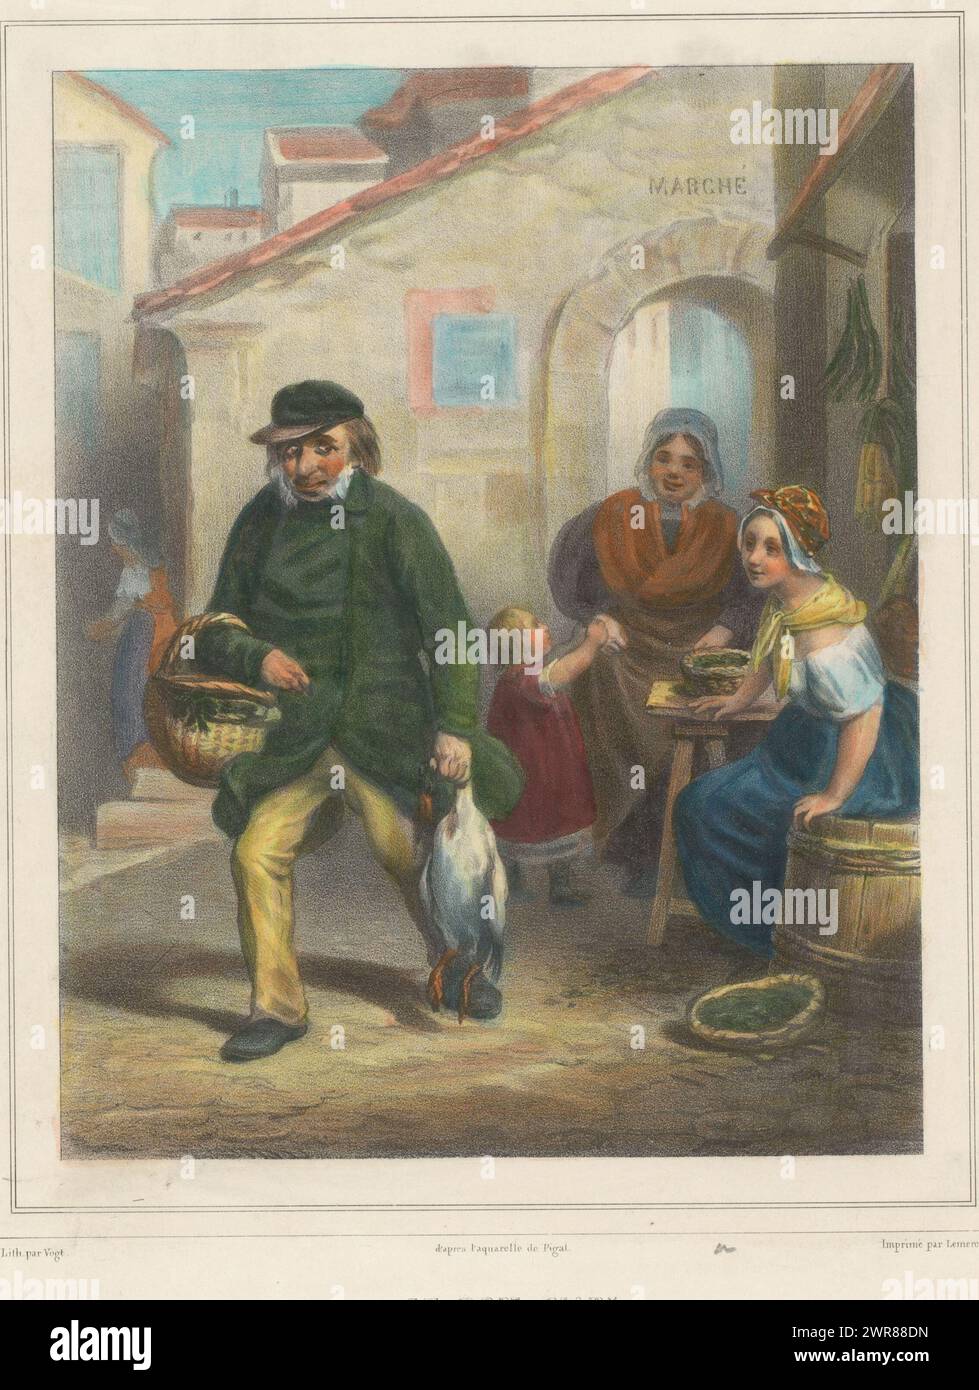 Man comes from the market with a full shopping basket and a goose, Le bon mari (title on object), Museum for the art lover (series title), Musée de l'amateur (series title on object), print maker: Charles Vogt, after painting by: Edme Jean Pigal, printer: Joseph Rose Lemercier, Paris, 1837 - 1843, paper, height 288 mm × width 220 mm, print Stock Photo